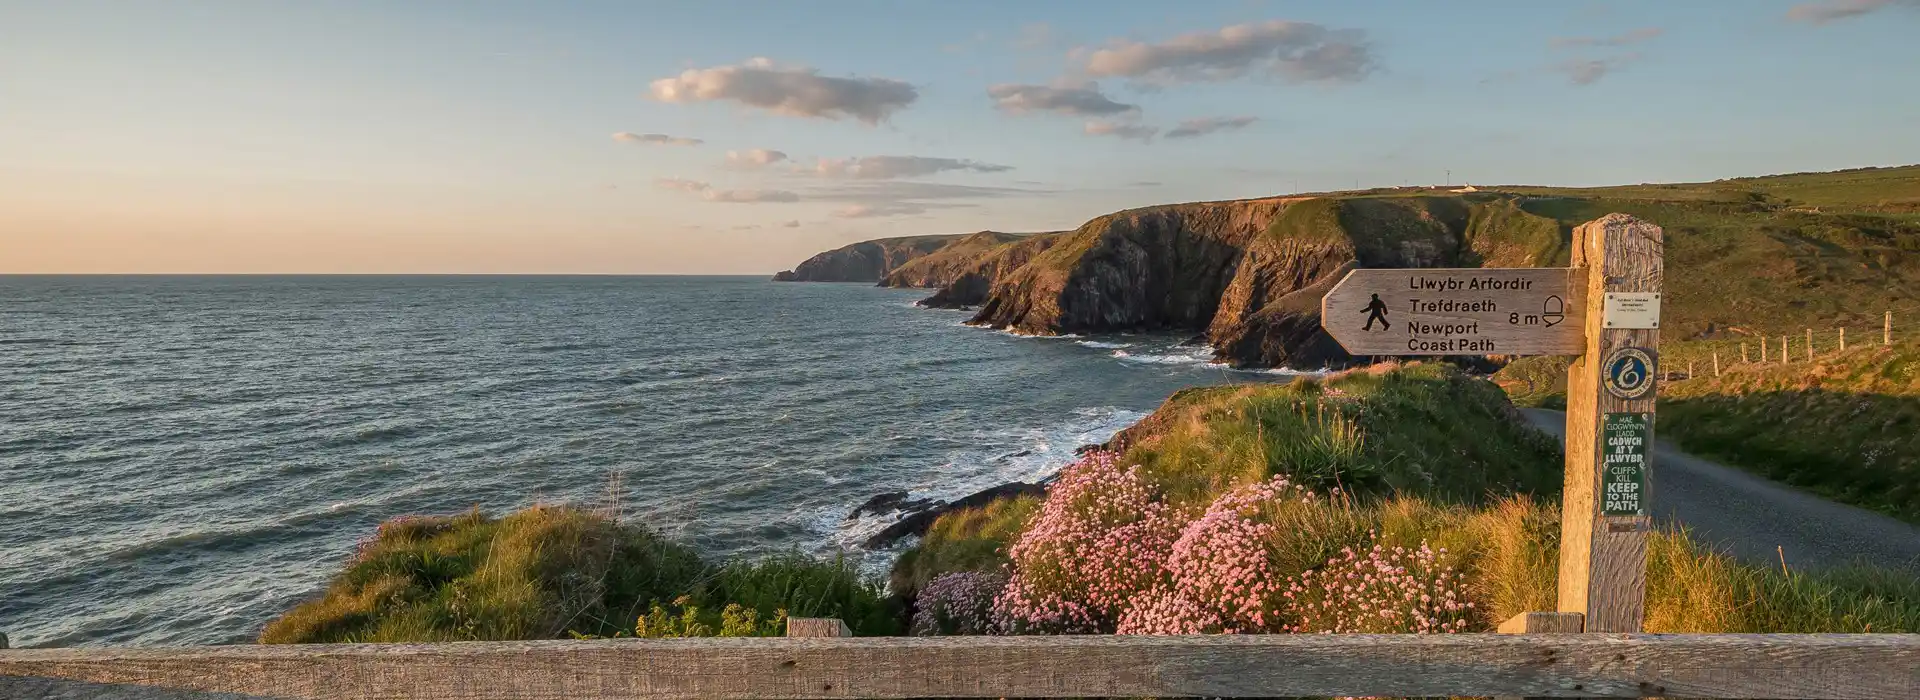 All year round campsites in Pembrokeshire